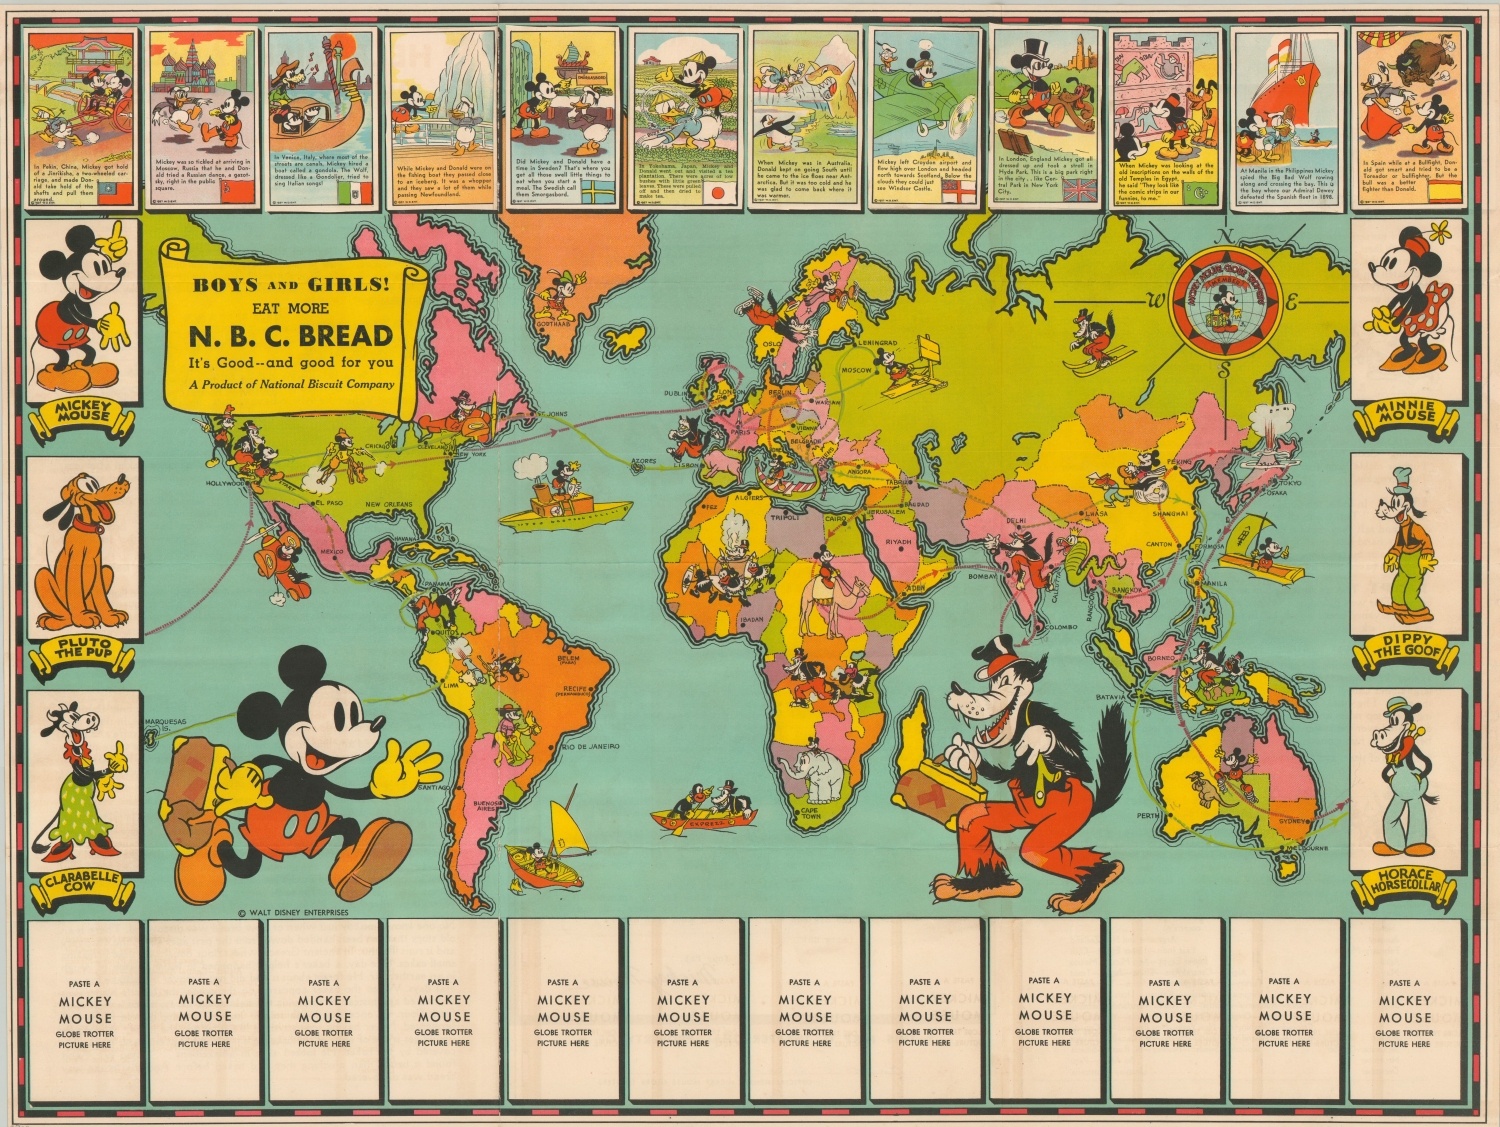 BOYS AND GIRLS! EAT MORE N.B.C. BREAD [MICKY MOUSE GLOBETROTTER MAP]